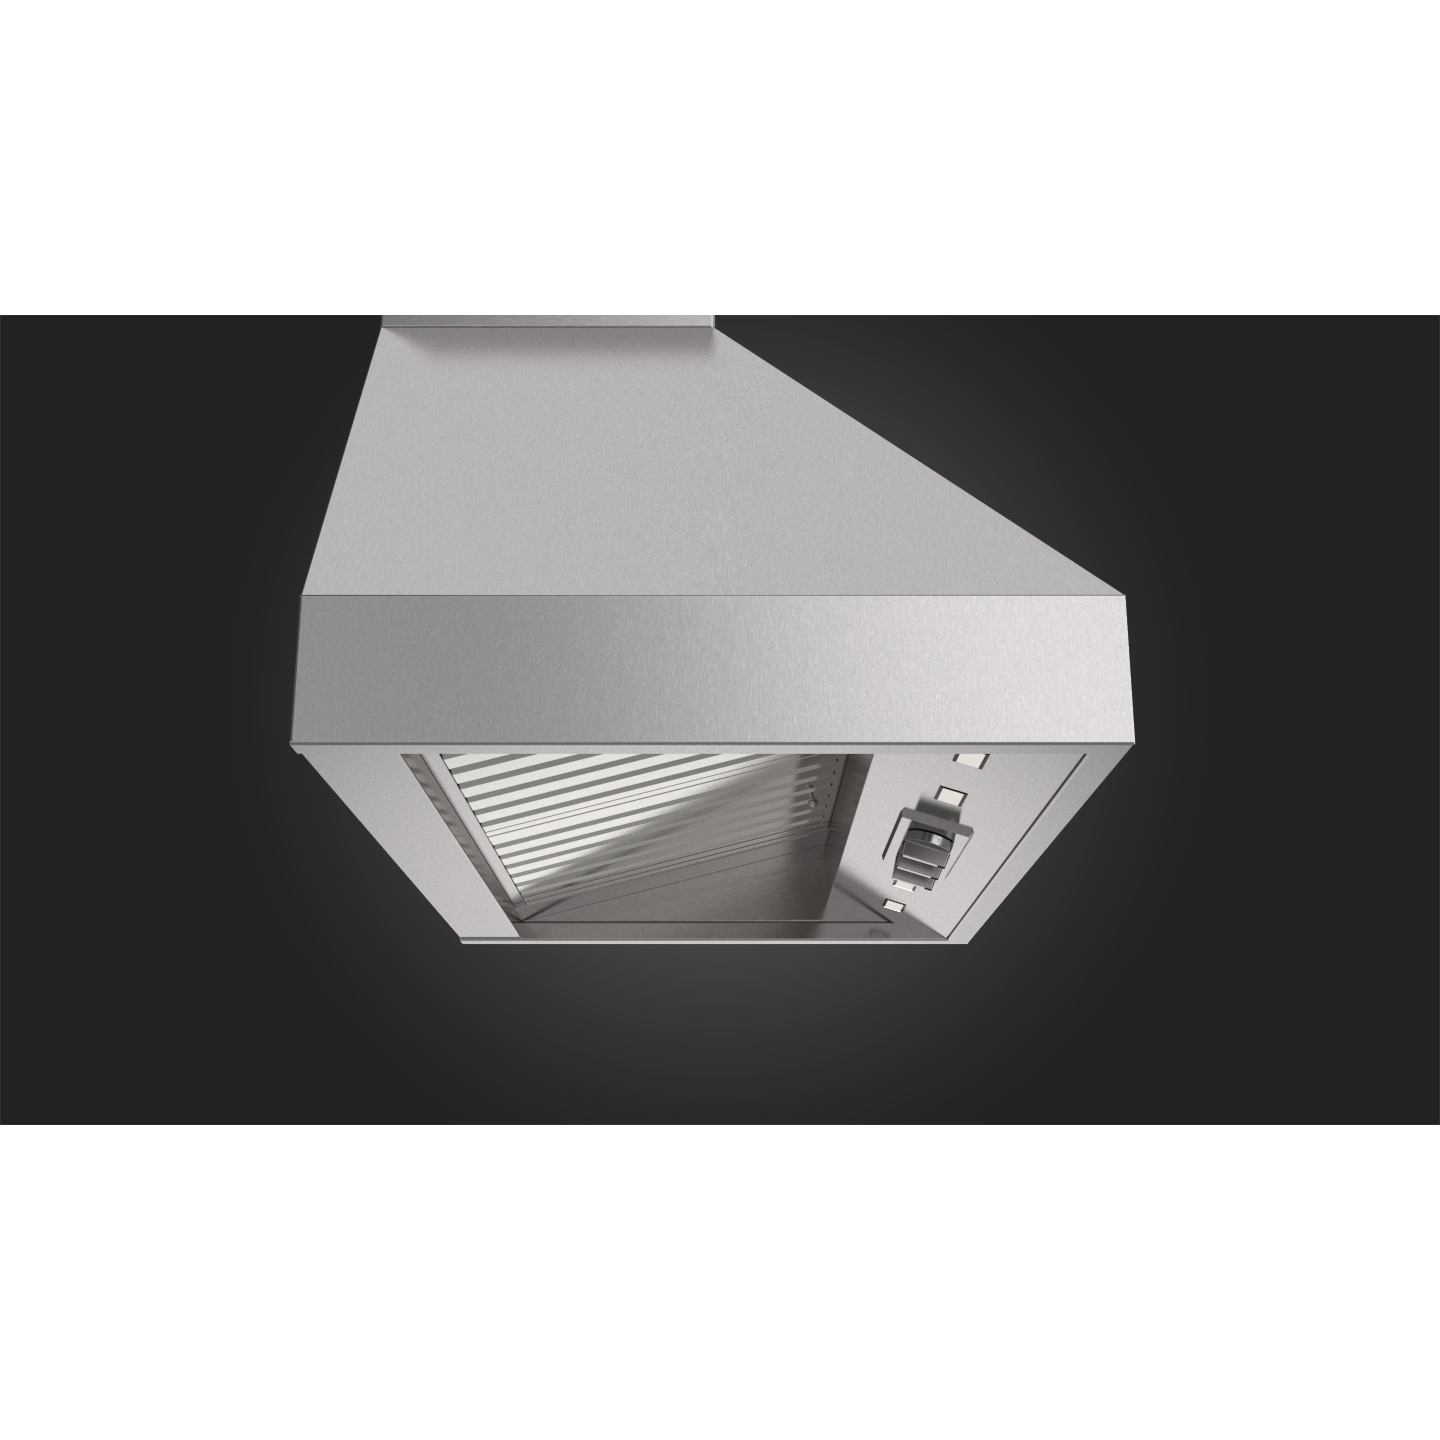 Fulgor Milano 36" Wall Mount Range Hood with 1,000 CFM Blower, Stainless Steel - F6PC36DS1